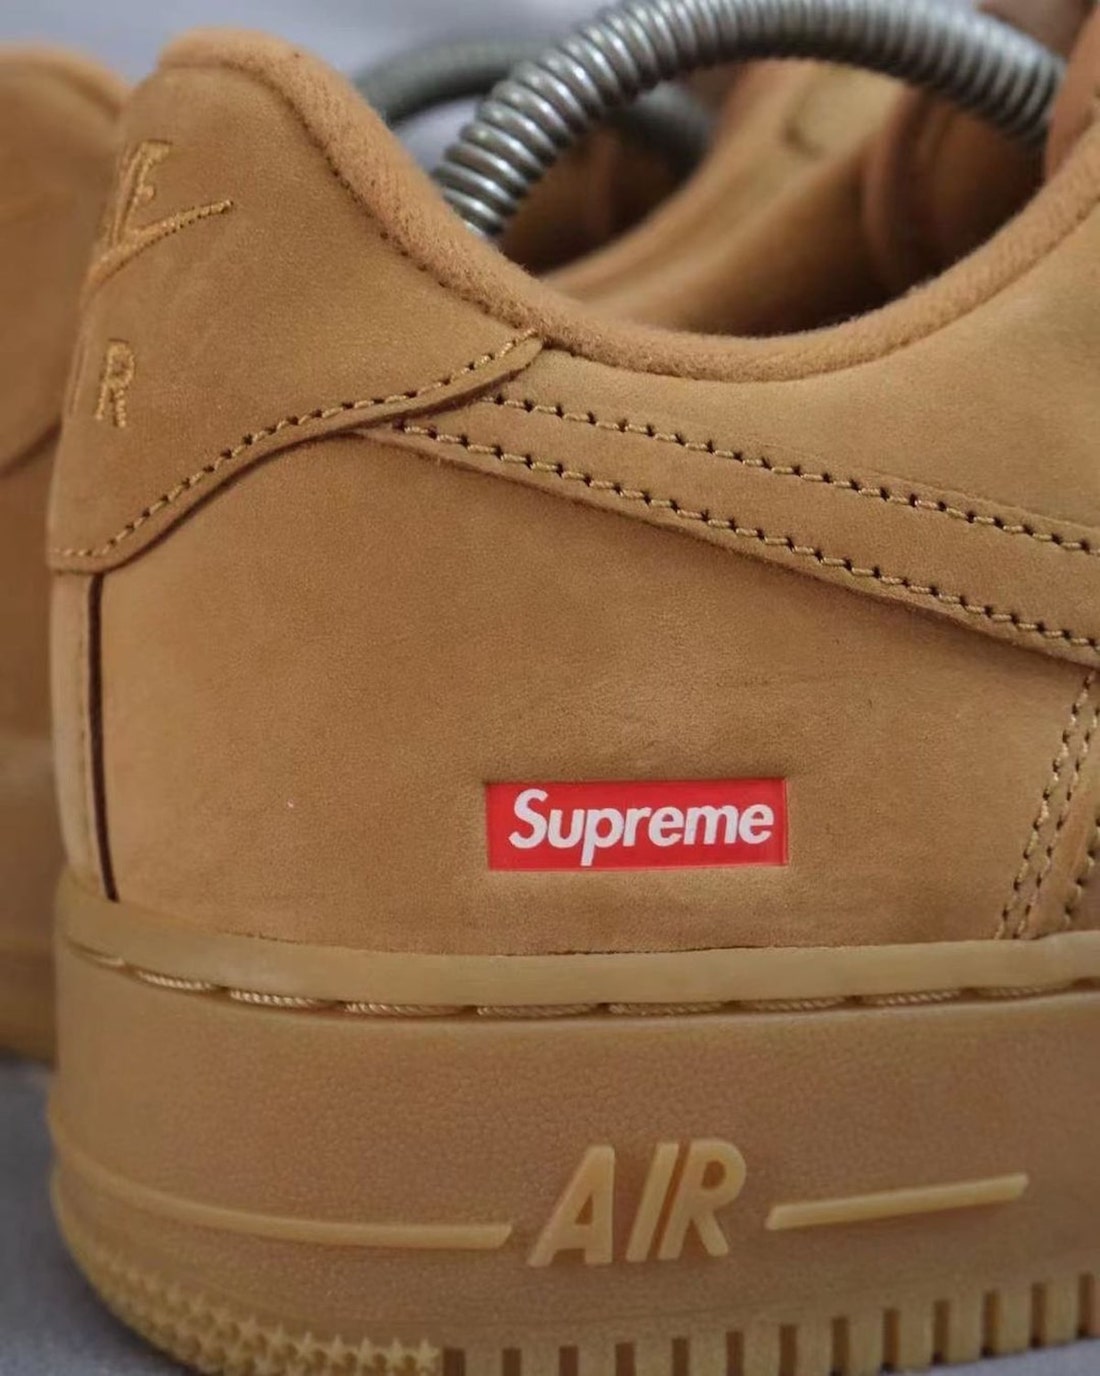 Supreme Nike Air Force 1 Low Flax Release Date